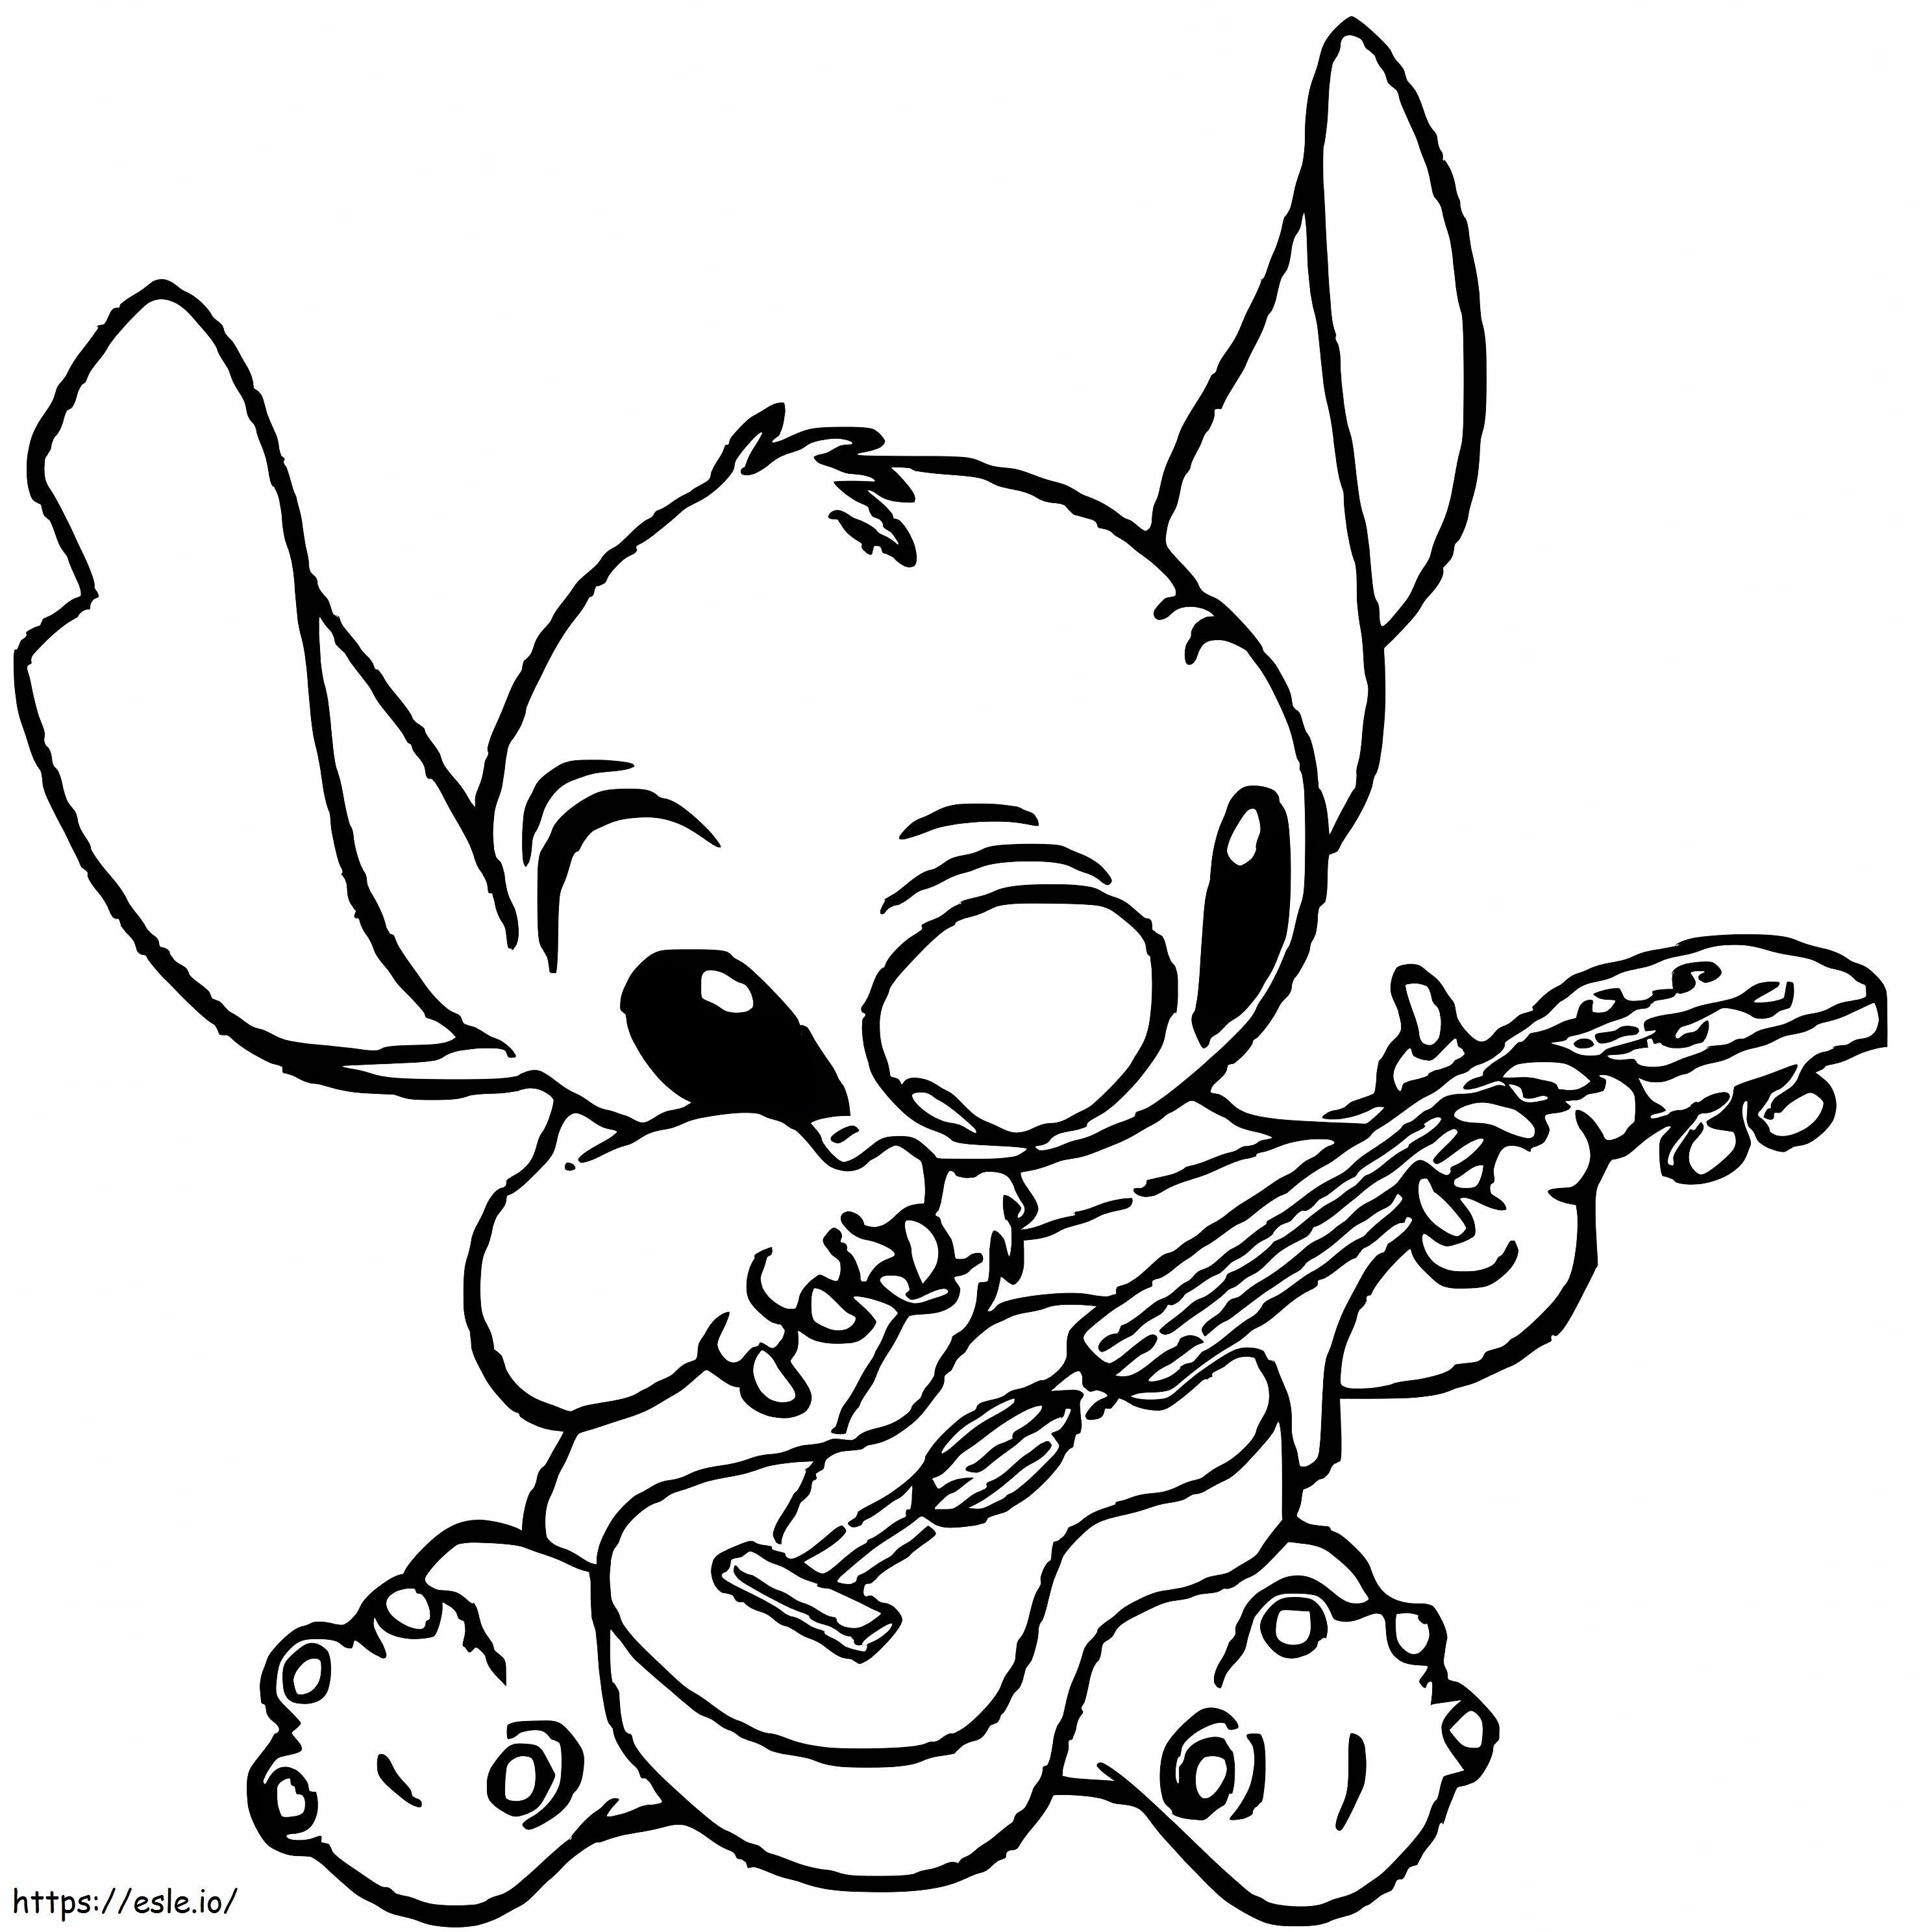 Stitch Plays The Guitar coloring page